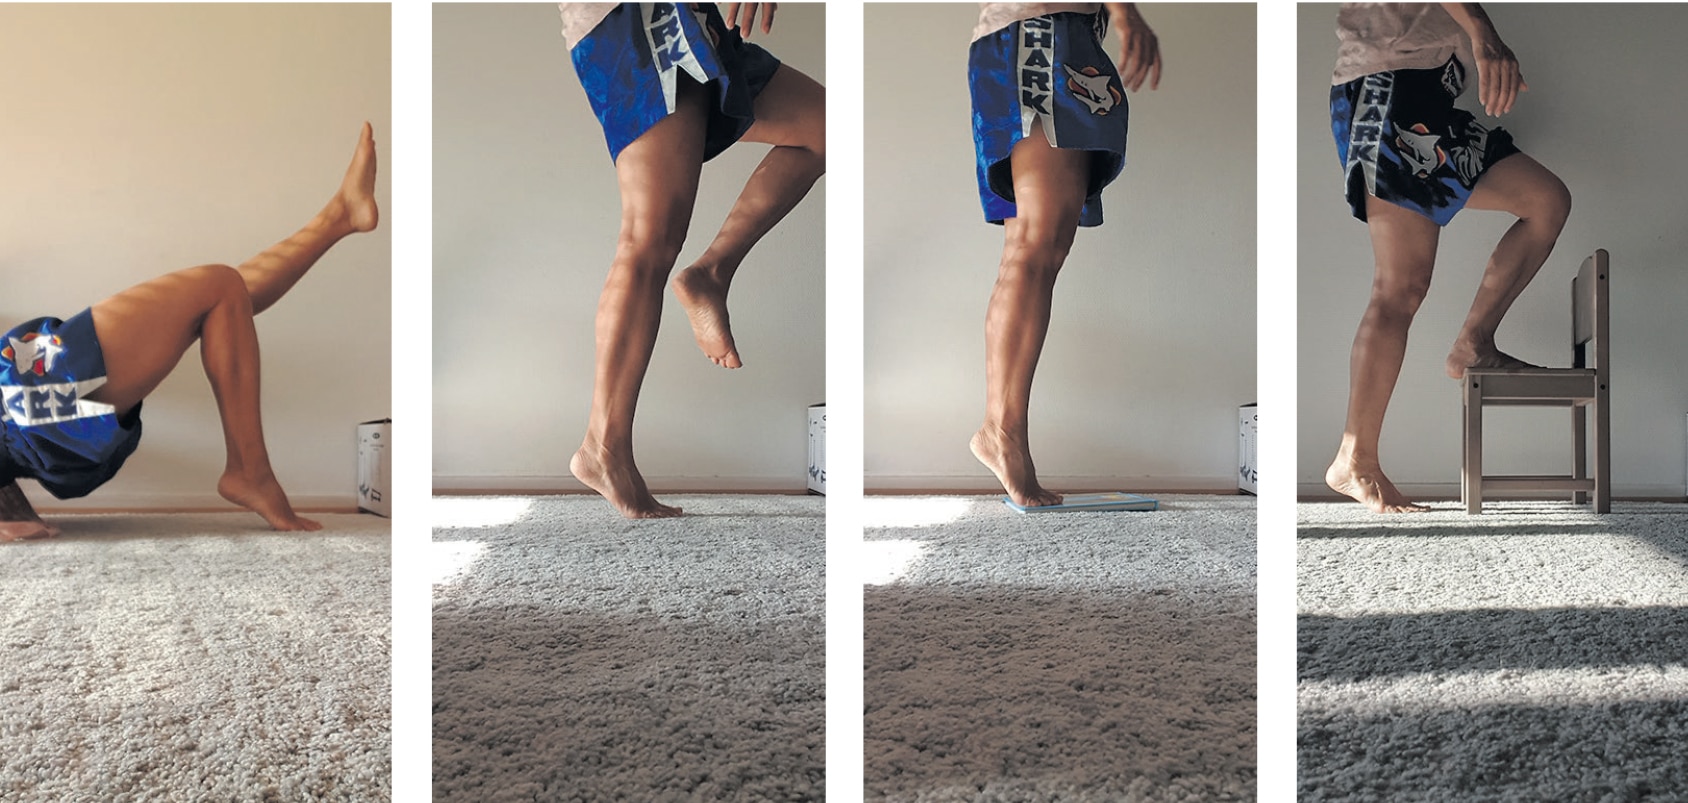 Strengthening the calf muscles